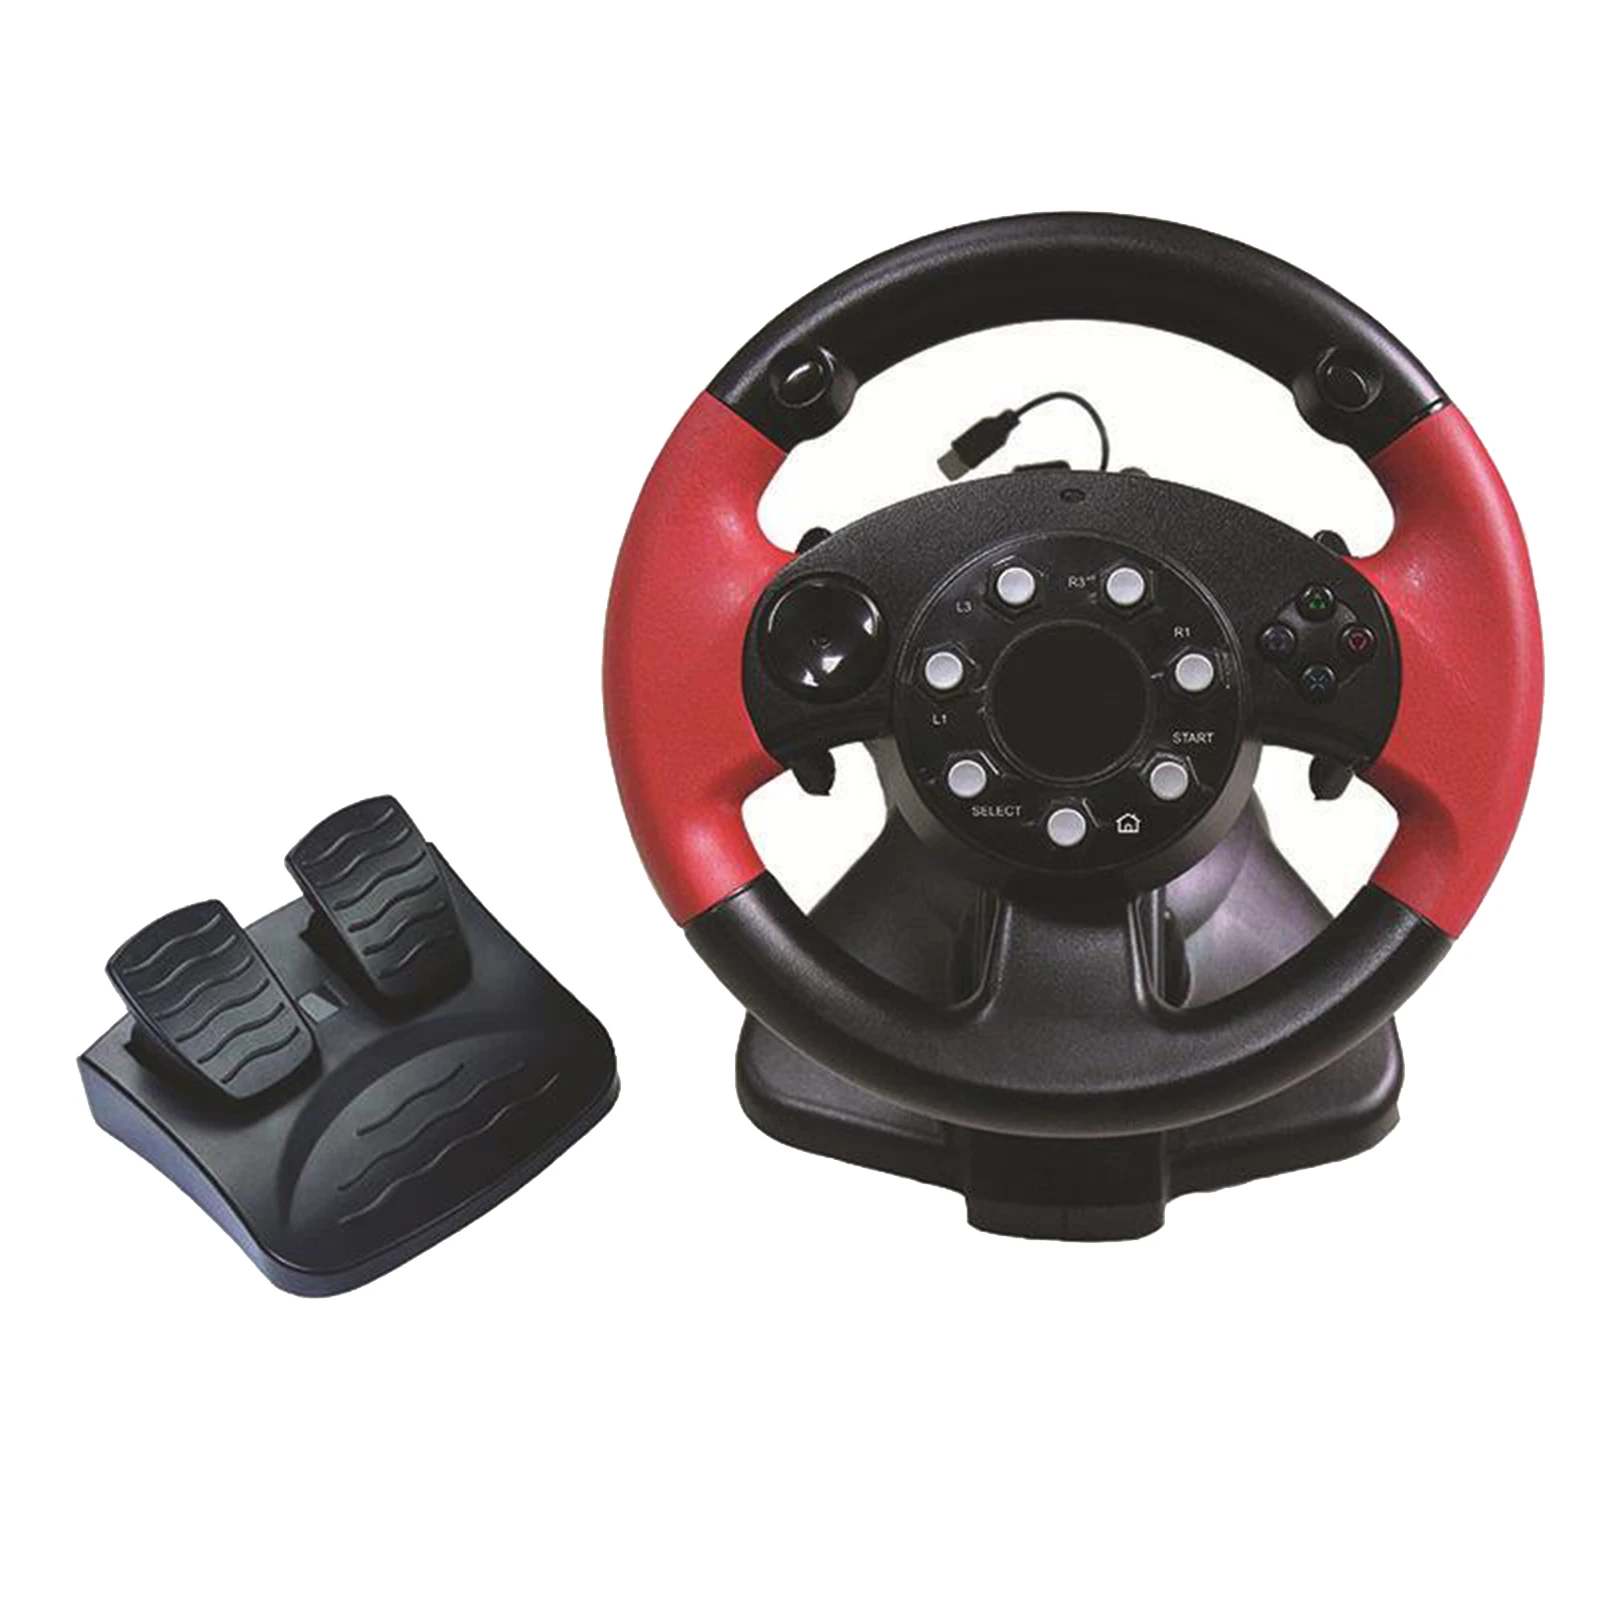 PC Racing Wheel, 200 Degree Universal USB Car Race Steering Wheel with Pedals for PS3, PS2